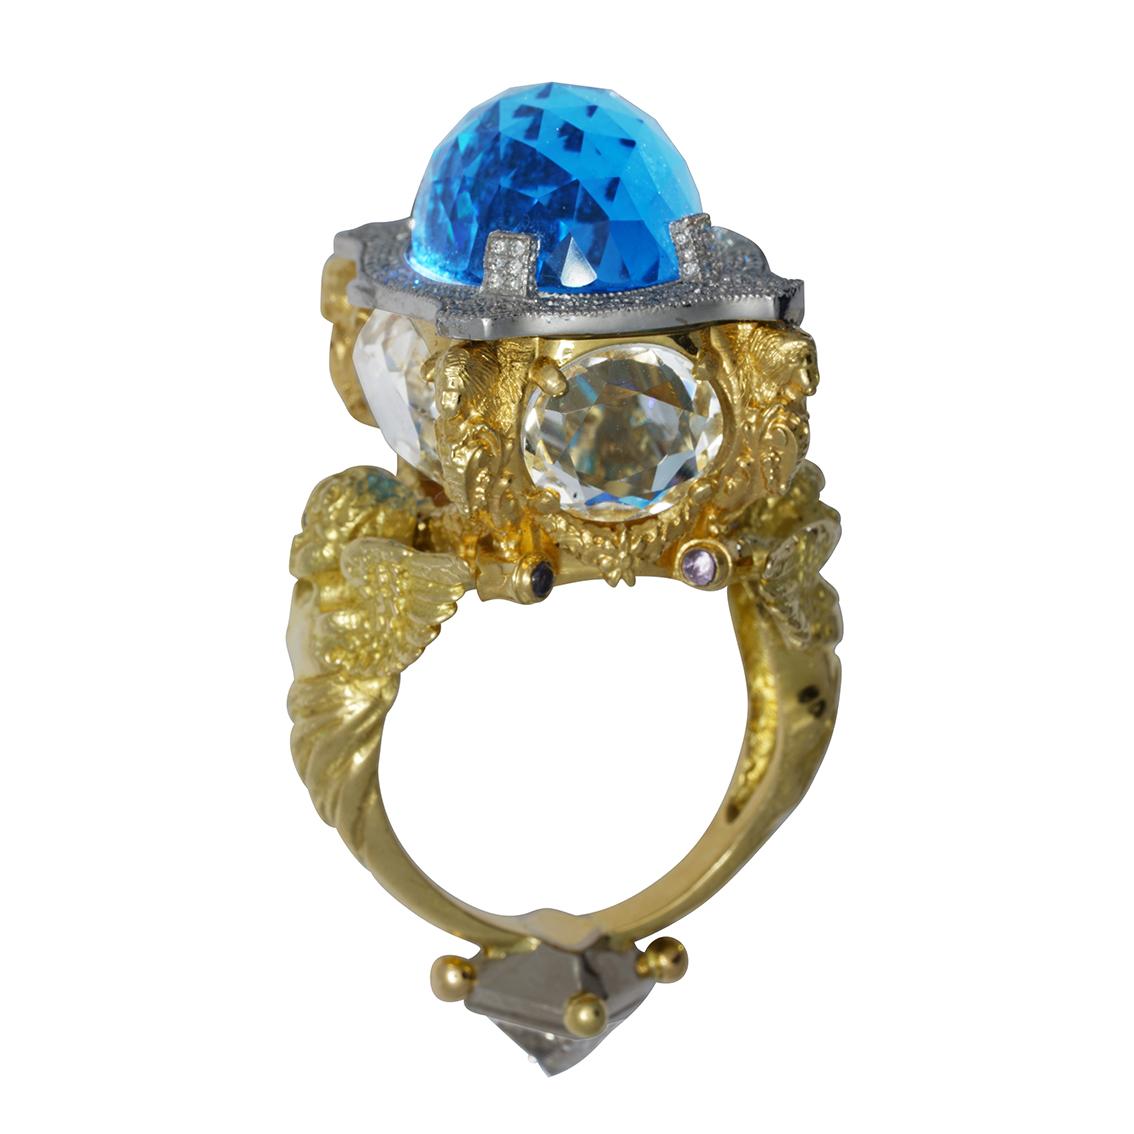 Gothic Revival Blue Topaz and Diamond Chamber Ring